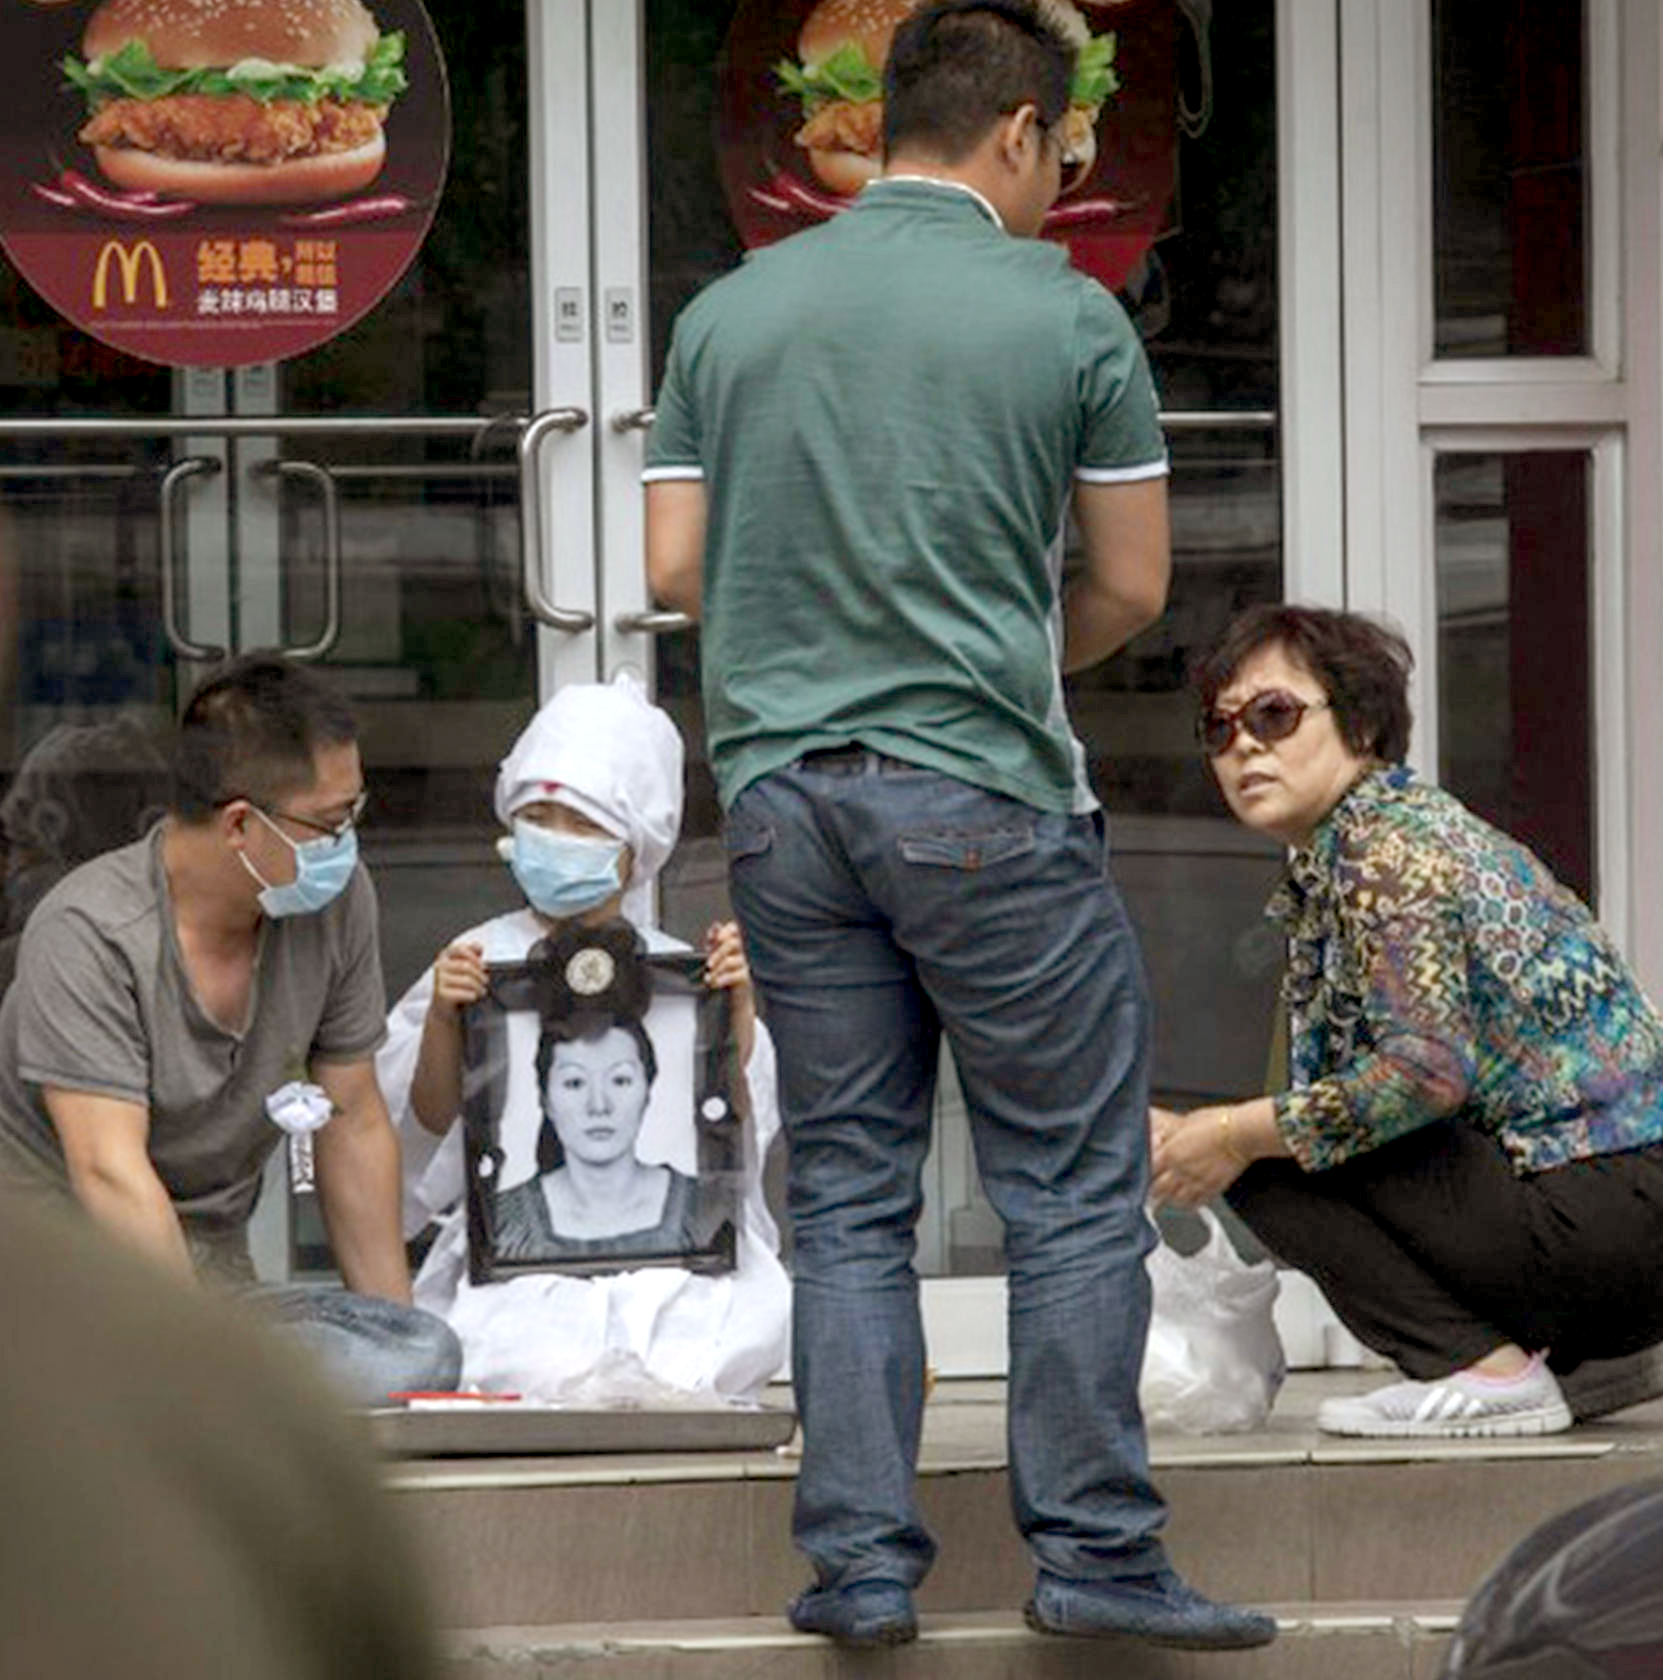 The family of victim Wu Shuoyan mourns in front of the Zhaoyuan restaurant yesterday. Photo: SCMP